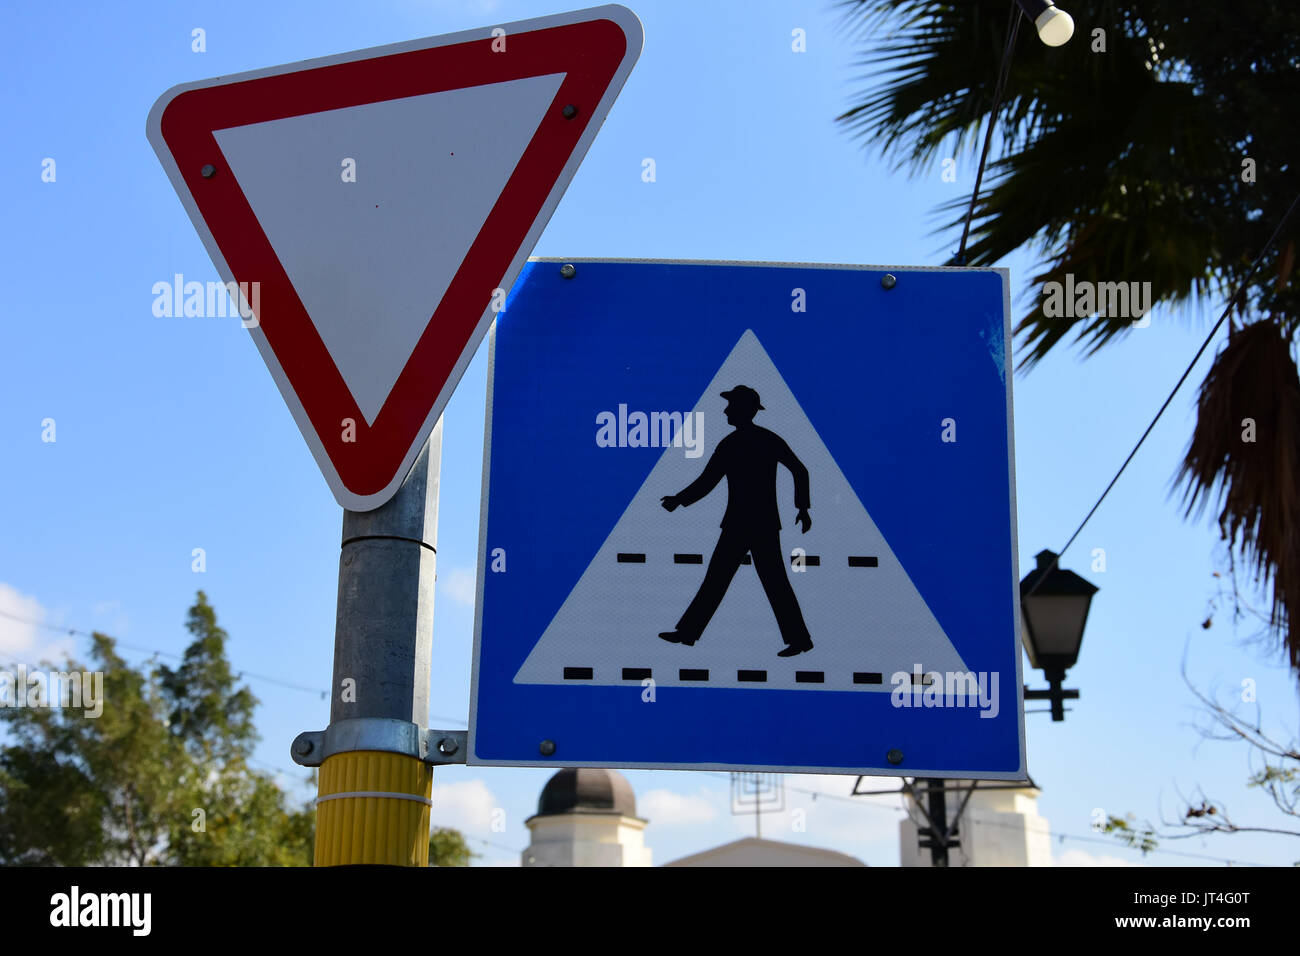 pedestrian crossing sign in israel Stock Photo